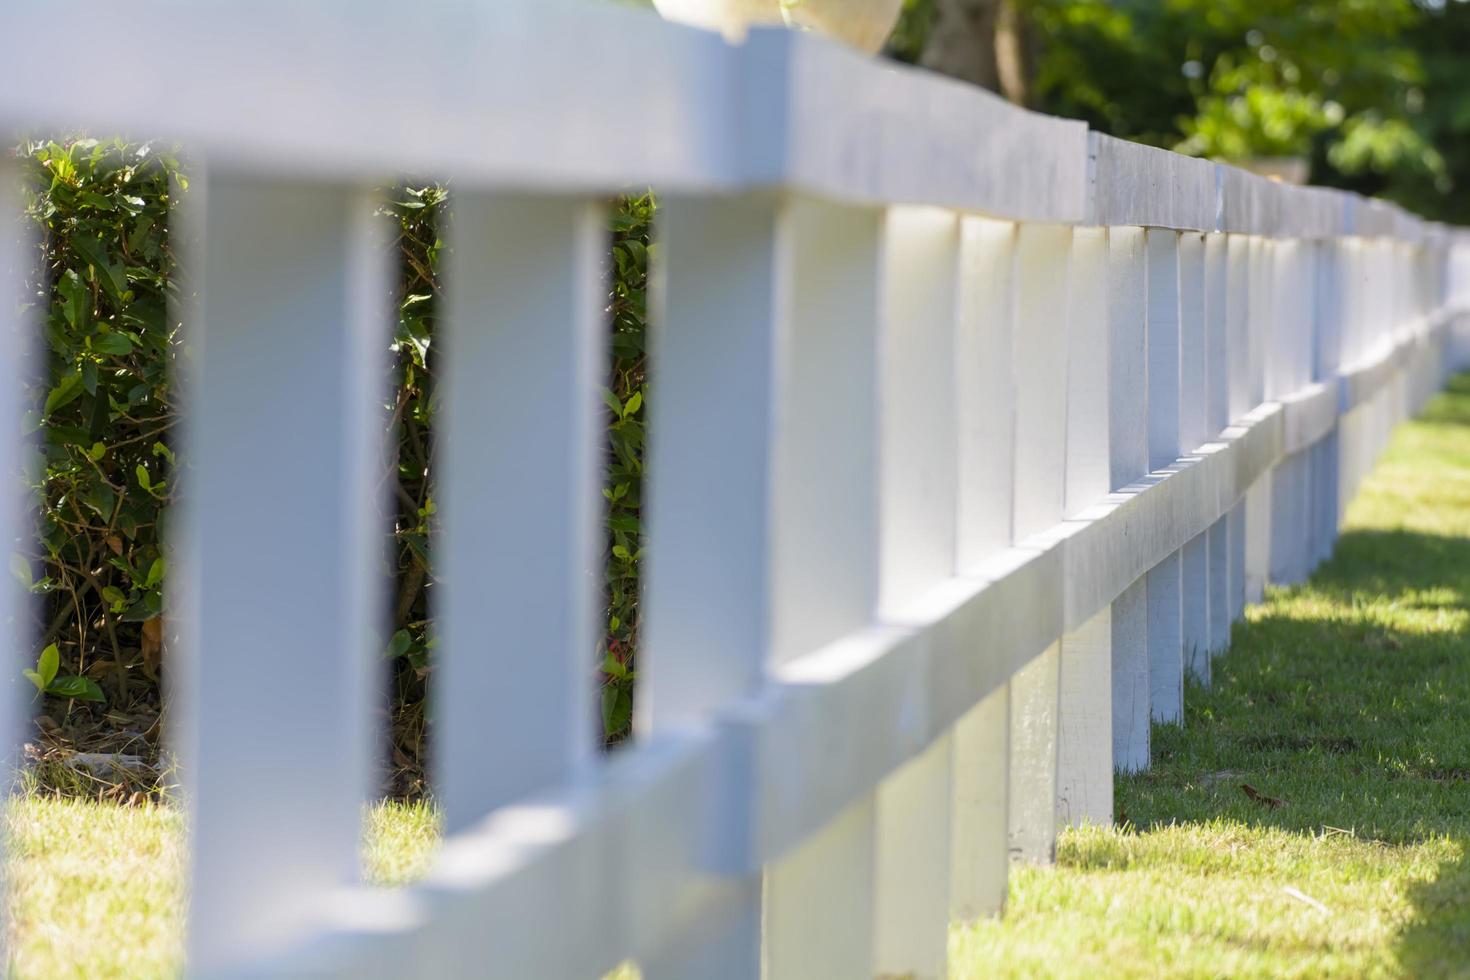 A fence is a freestanding structure designed to restrict or prevent movement across a boundary. photo